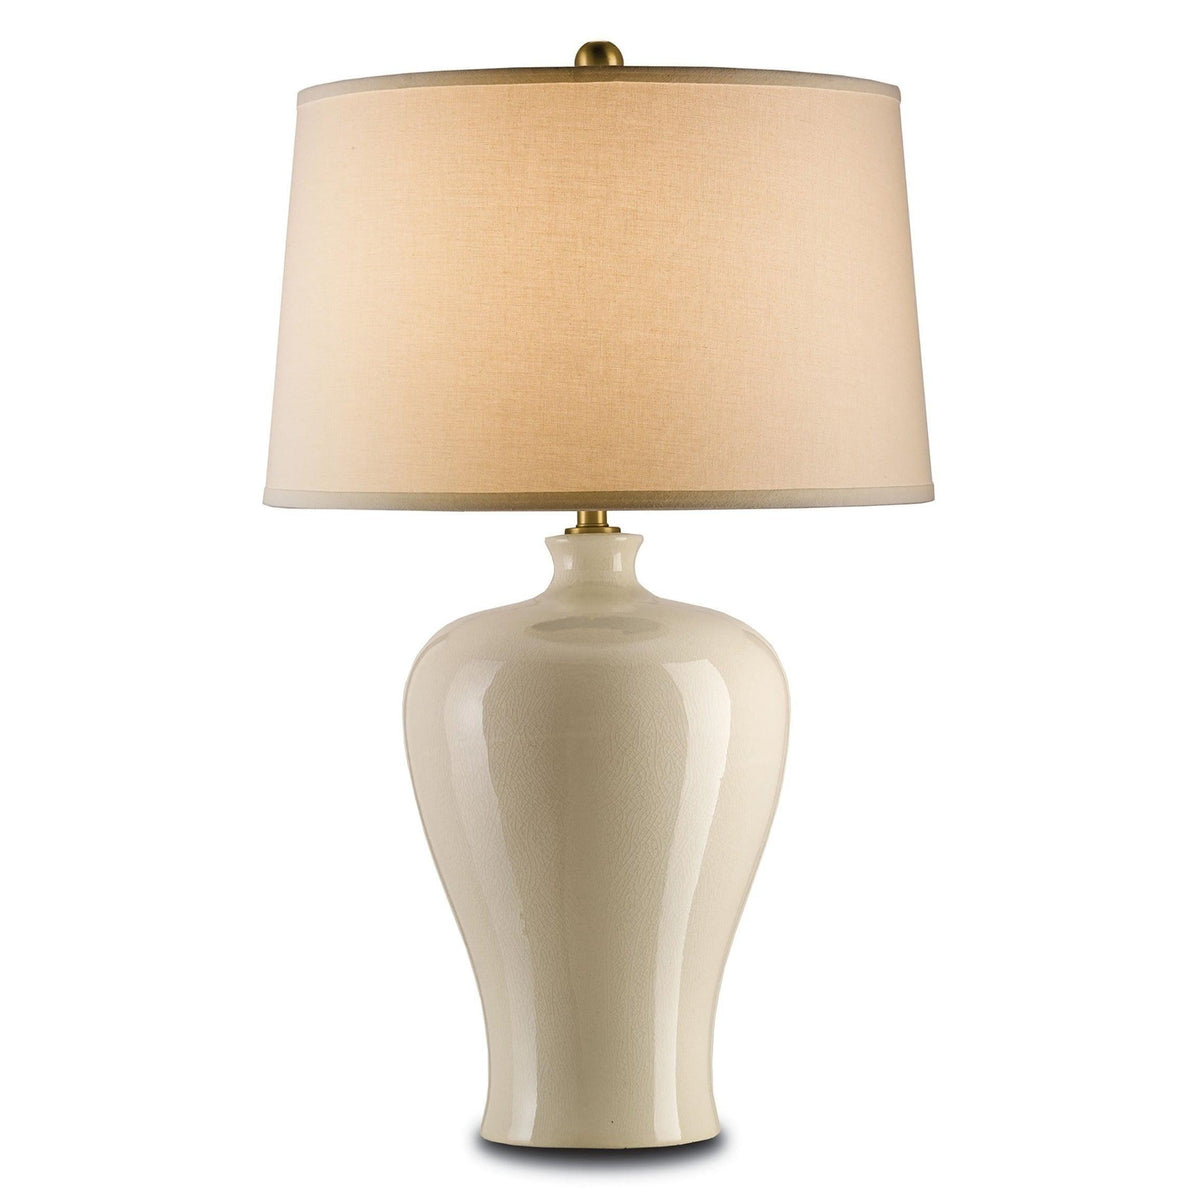 Currey and Company - Blaise Table Lamp - 6822 | Montreal Lighting & Hardware